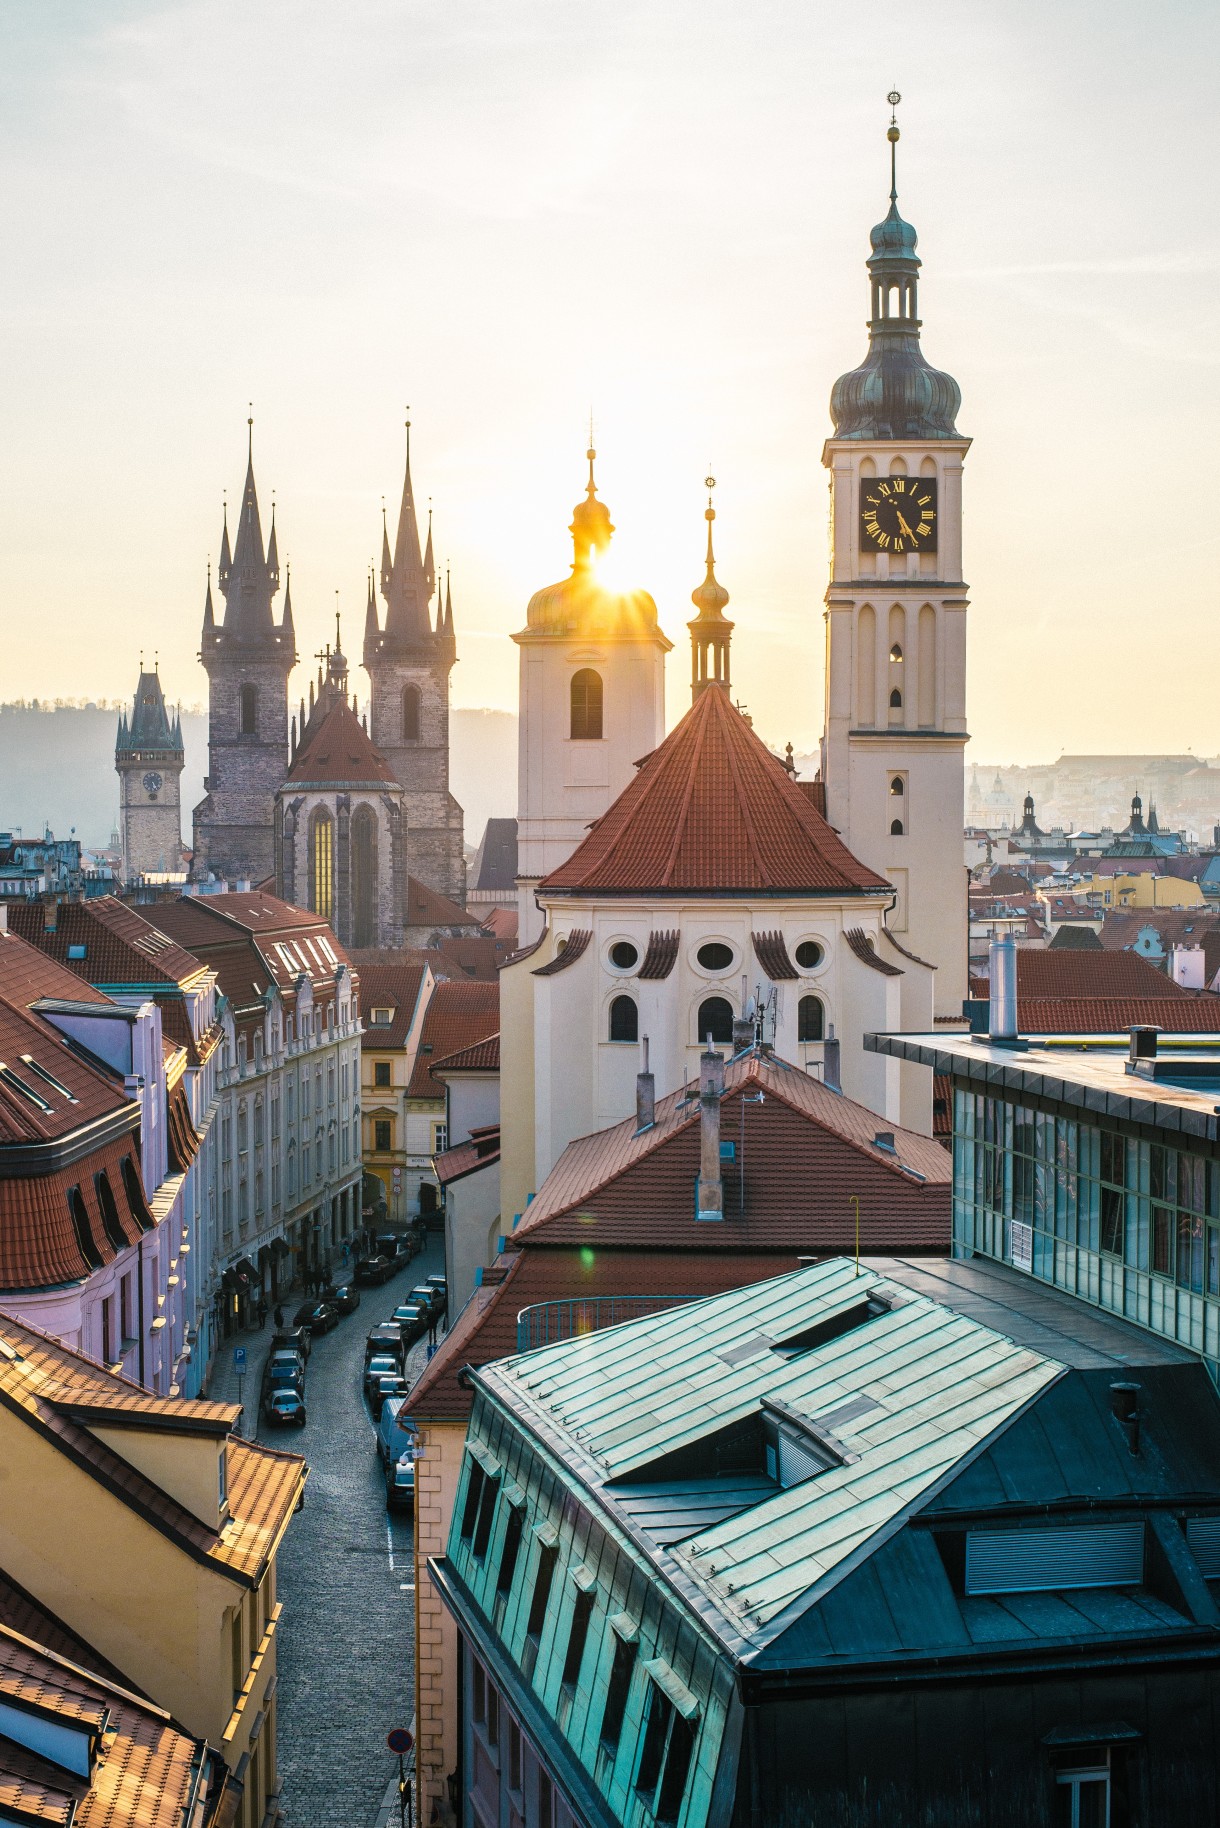 View of buildings and street during sunset in Prague